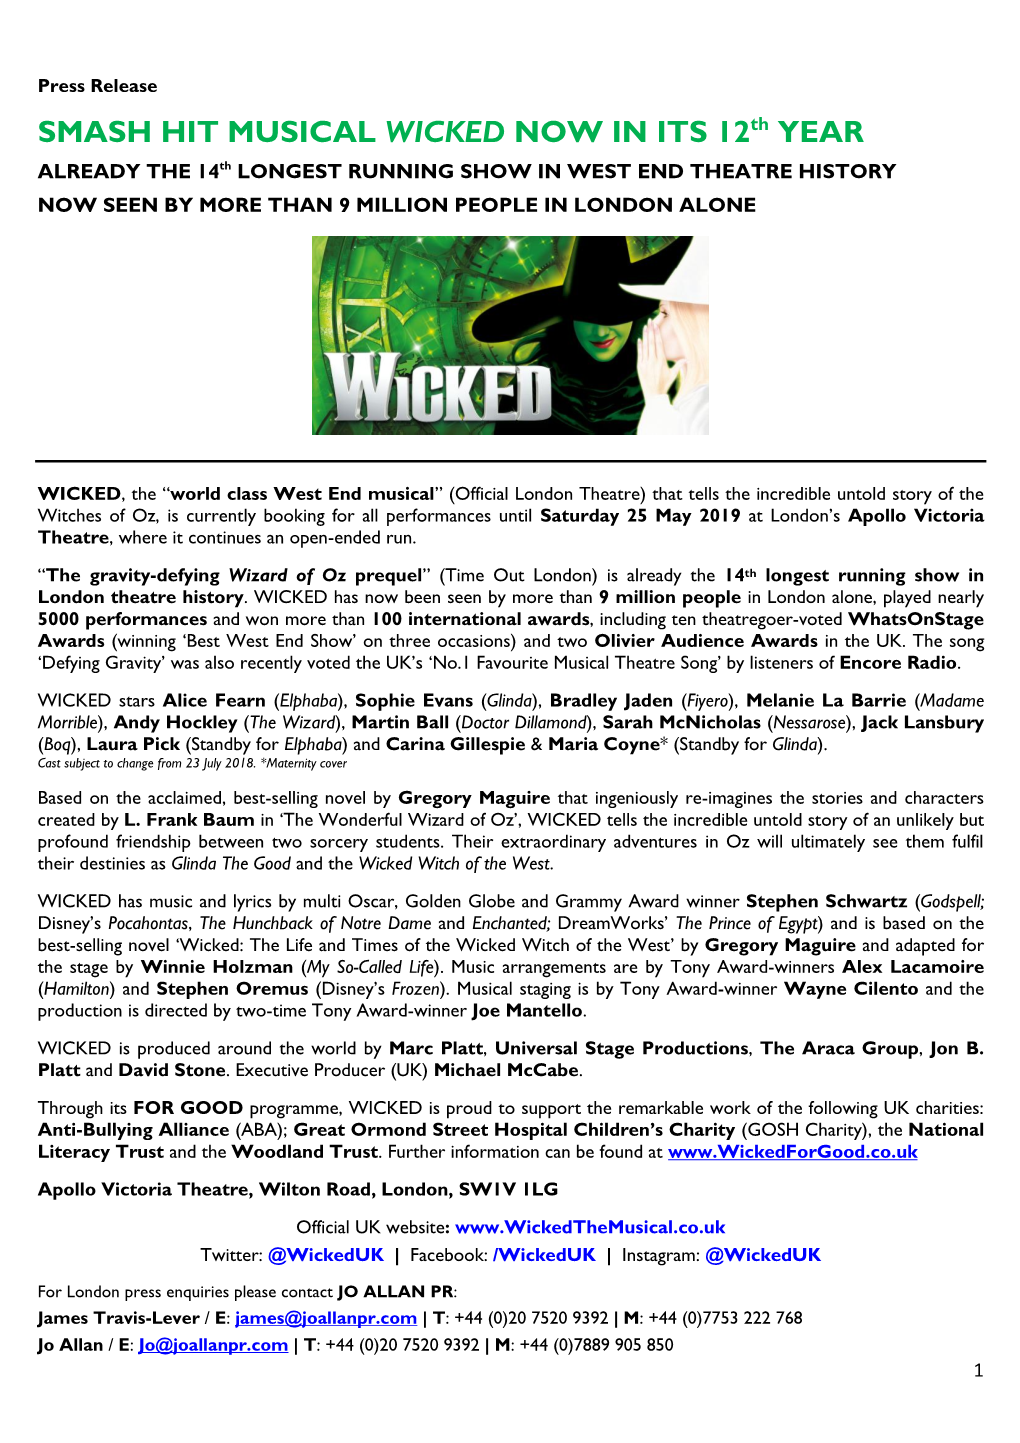 SMASH HIT MUSICAL WICKED NOW in ITS 12Th YEAR